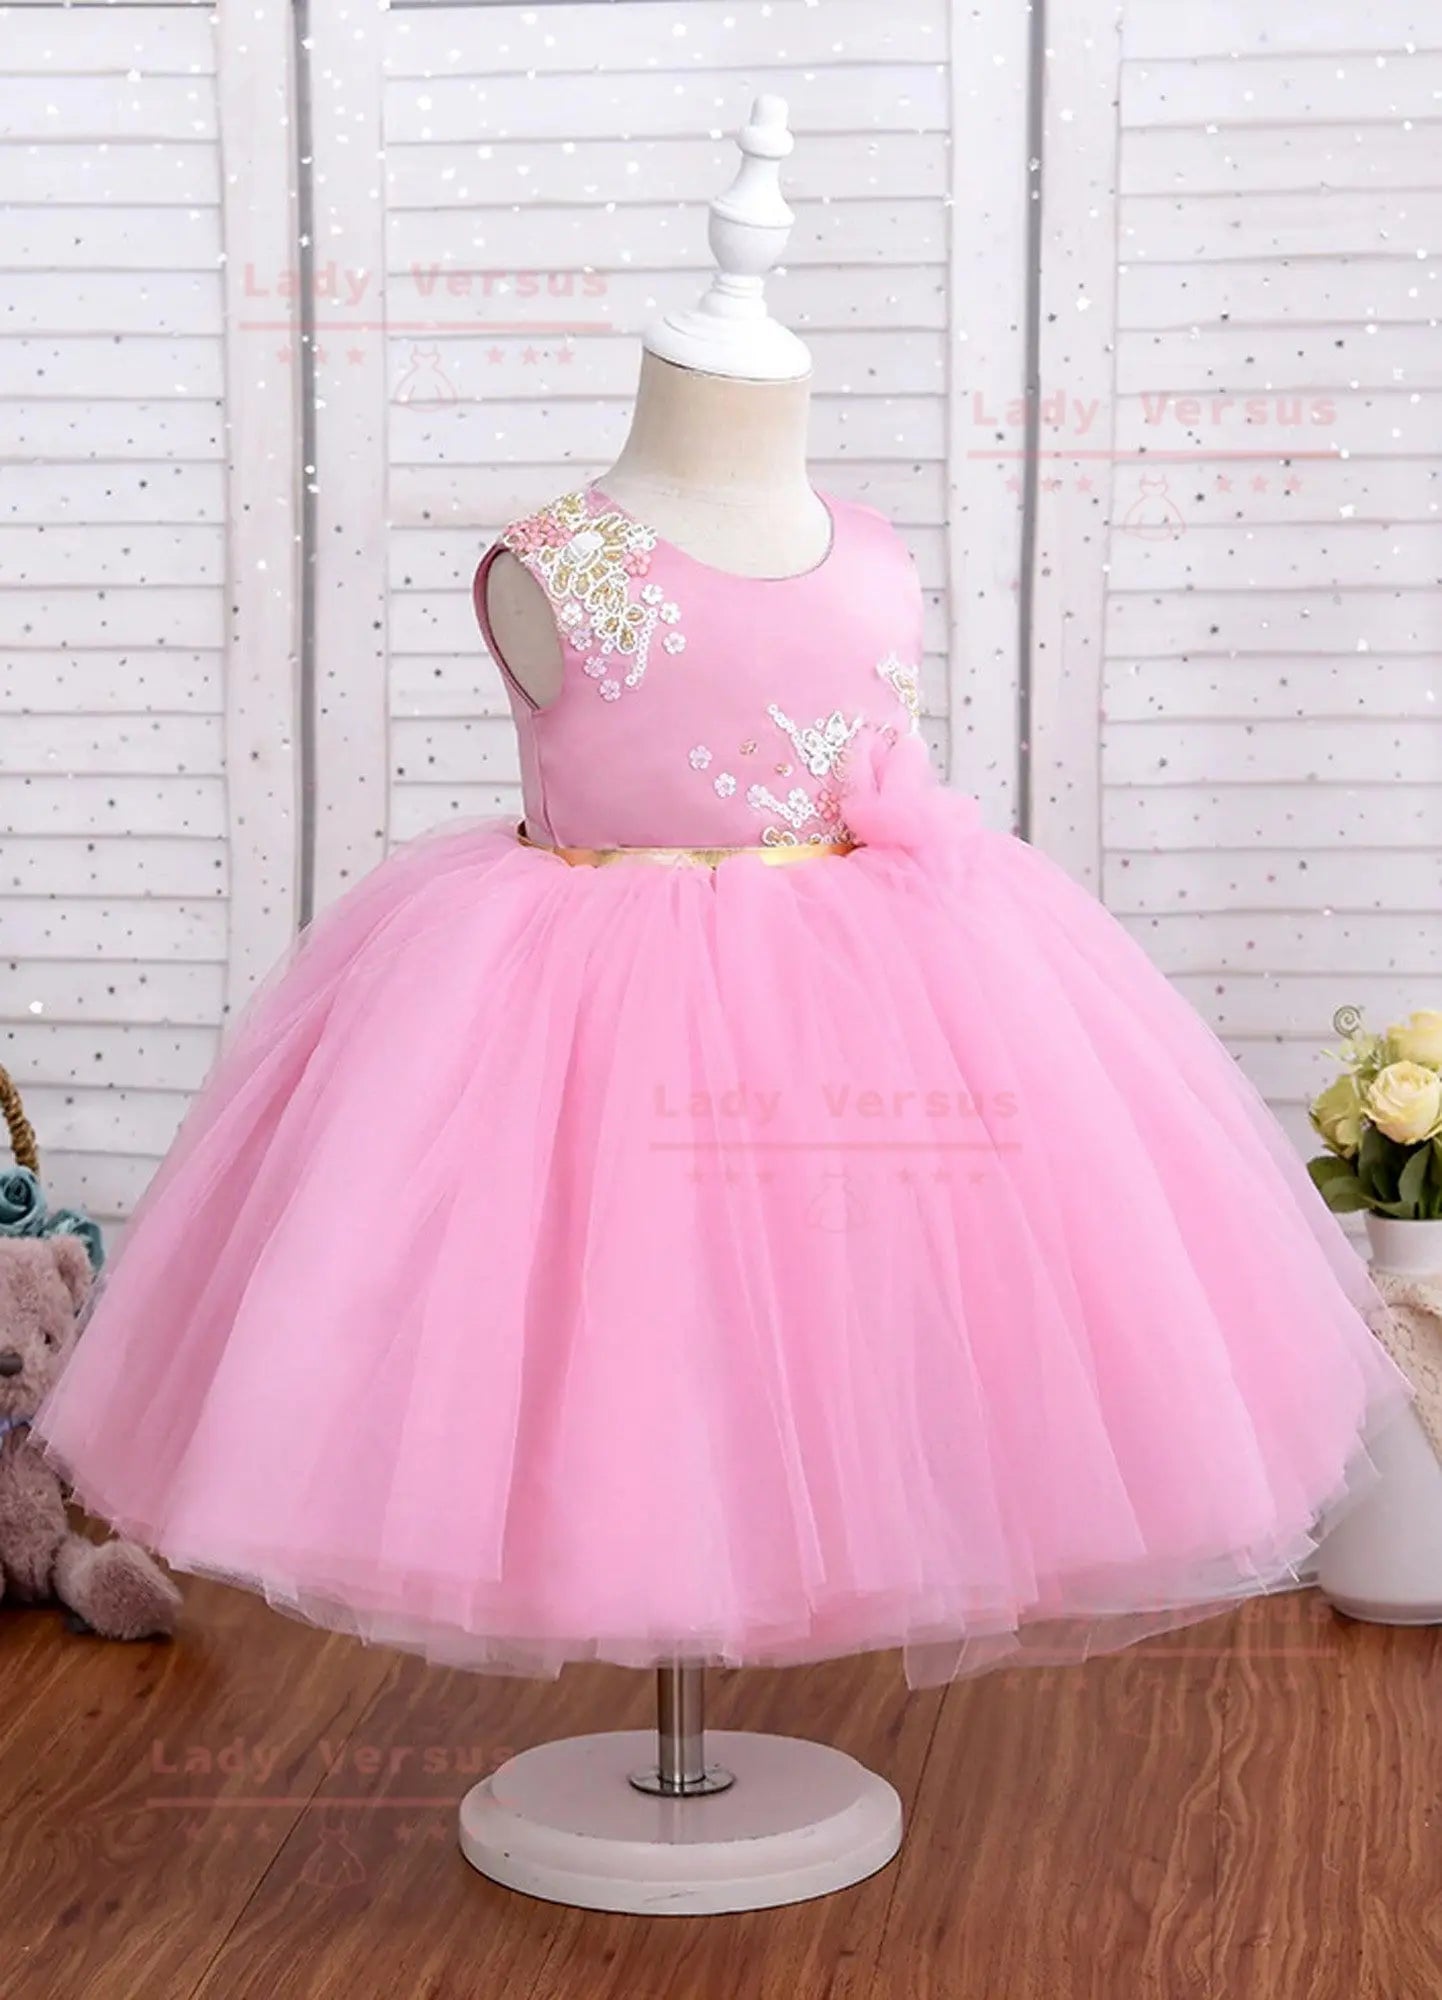 Baby Girl Party Dress / Girl Christening Gown/ Girl Baptism Outfit /birthday princess gown /toddler cake smash party/ 1st birthday party